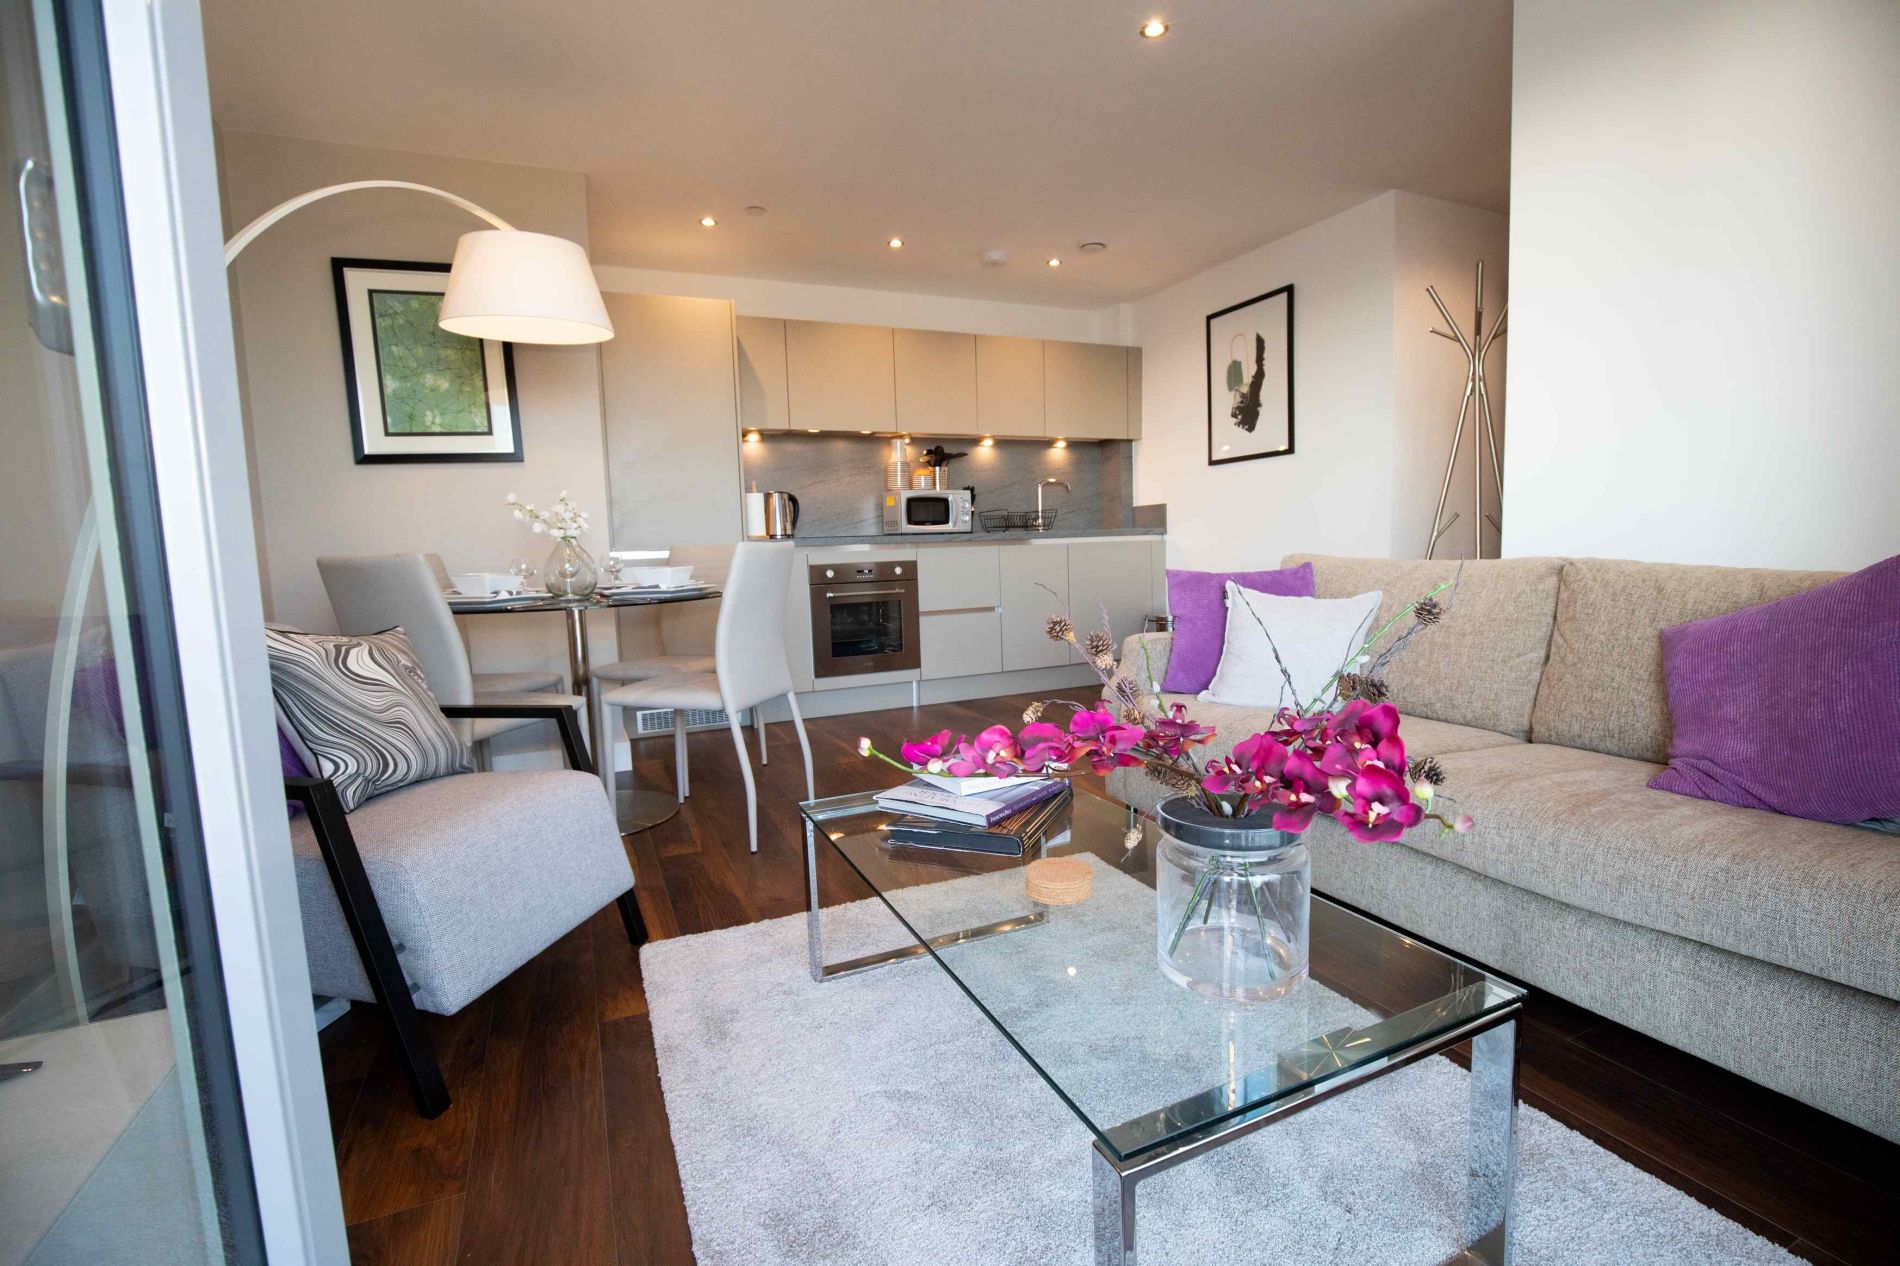 Serviced Accommodation in Manchester that allows pets